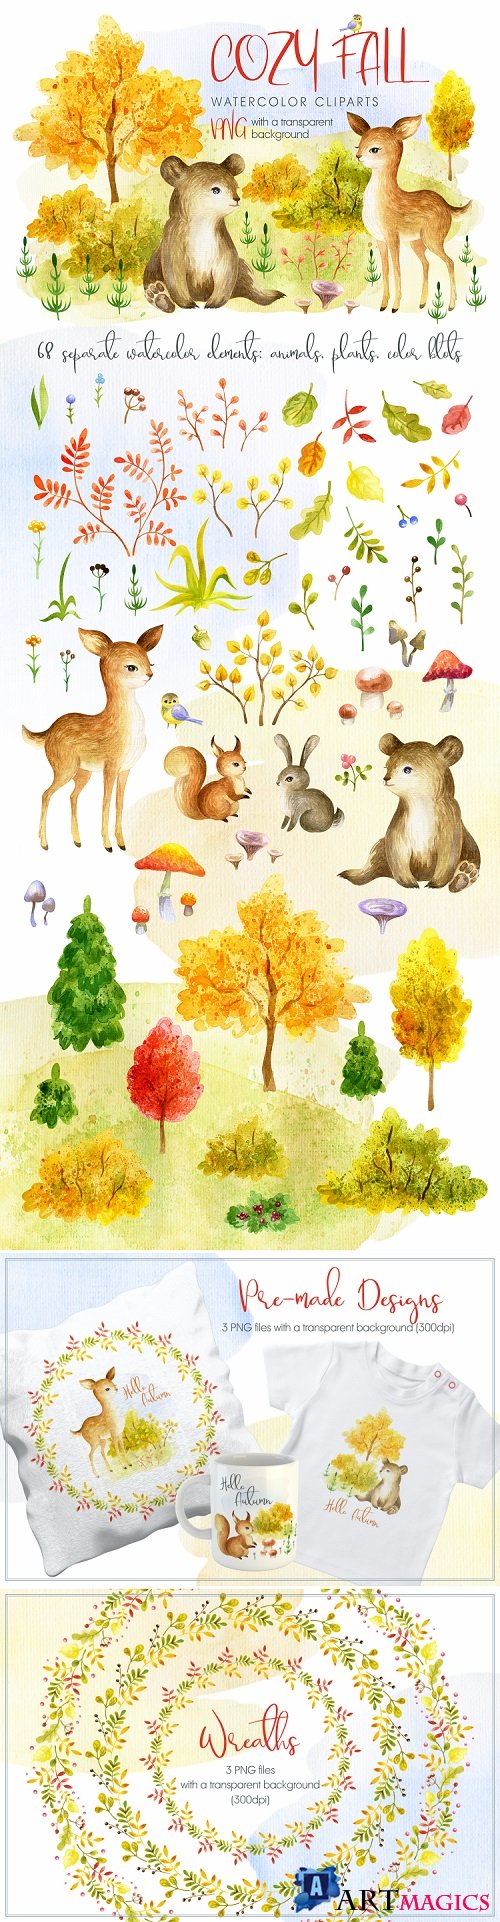 Cozy Fall. Watercolor Animals and Plants - 330849